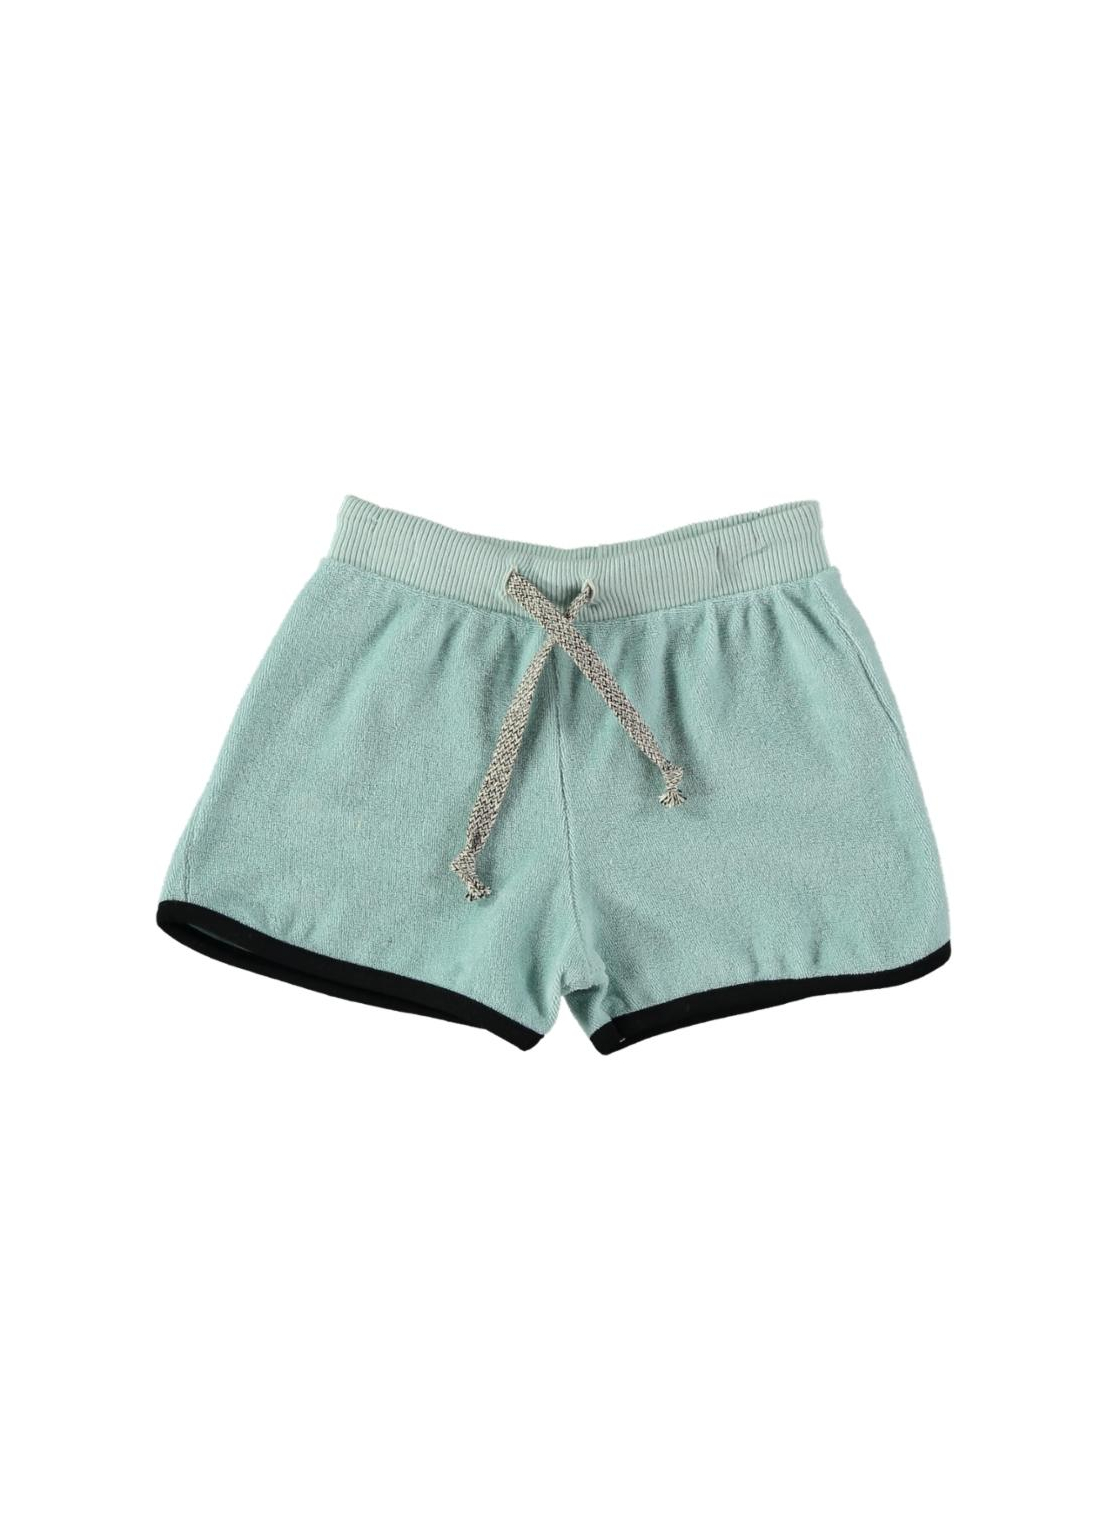 Kid SHORTS Unisex-100% Cotton-Knitted